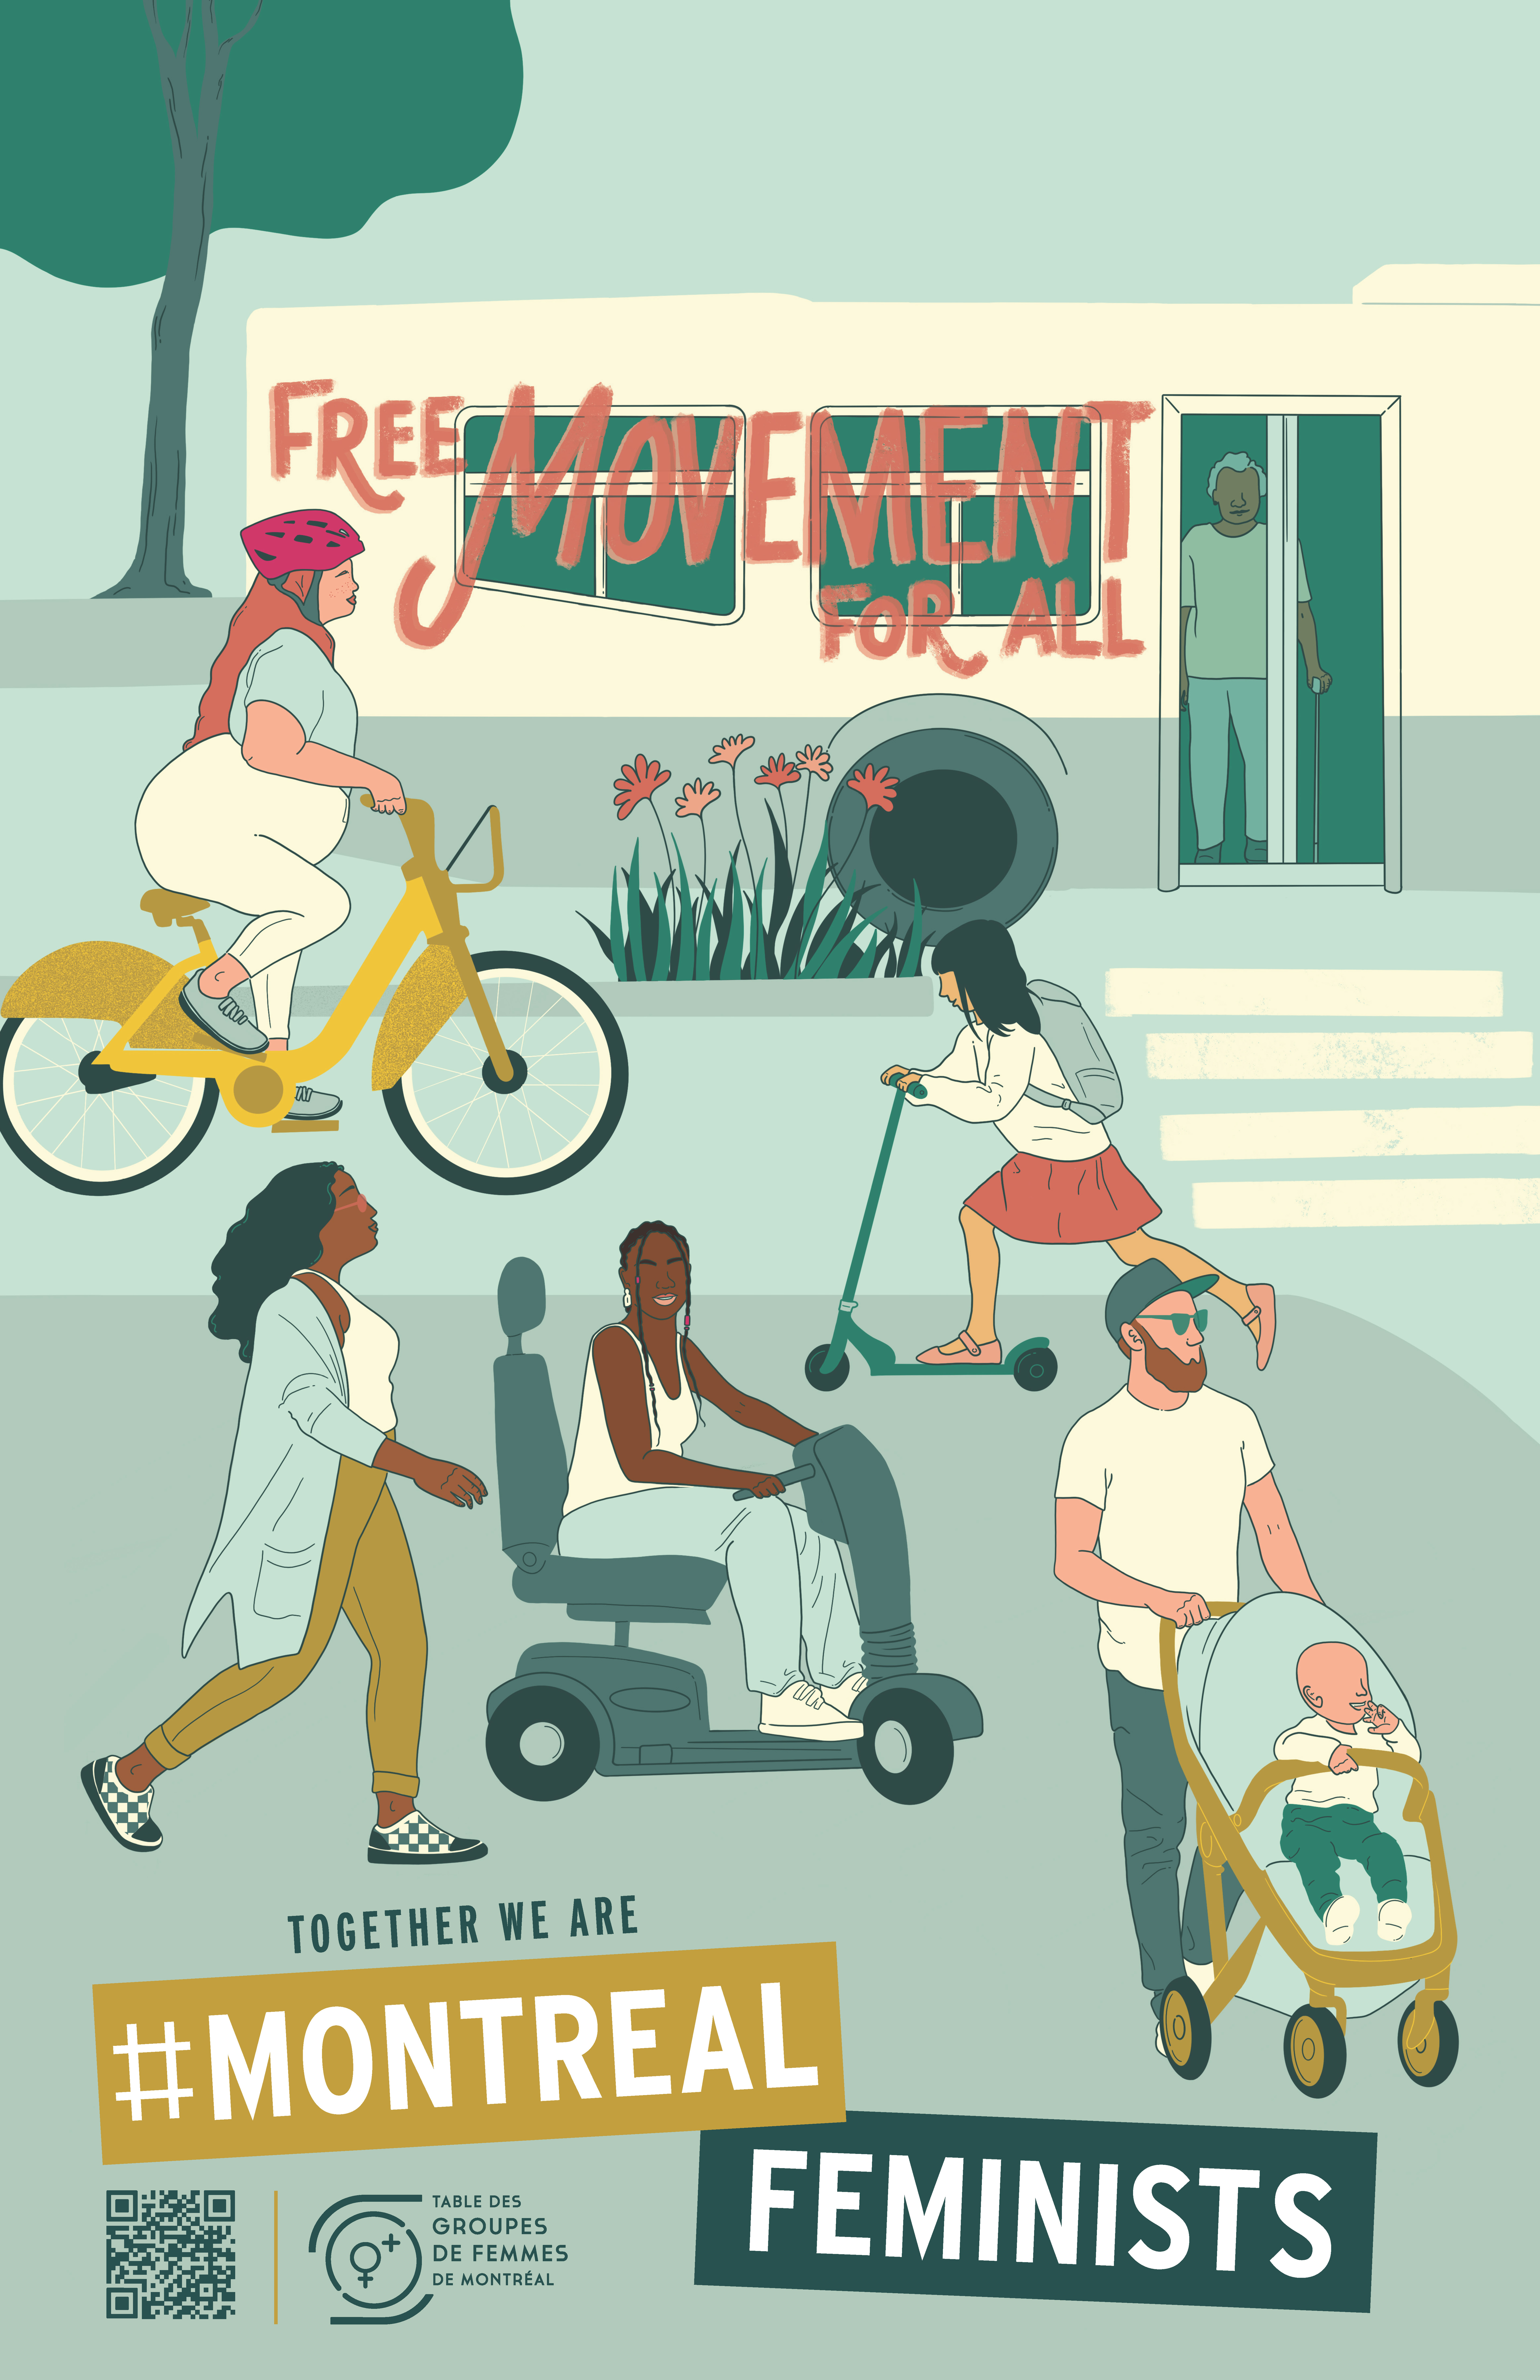 The poster shows several people moving with different means of transport. There's a heavier woman on a bike, a person with a cane getting off the bus, a black woman on foot, a young Asian girl on a scooter, a young black woman in a motorized wheelchair and a man with a stroller.  